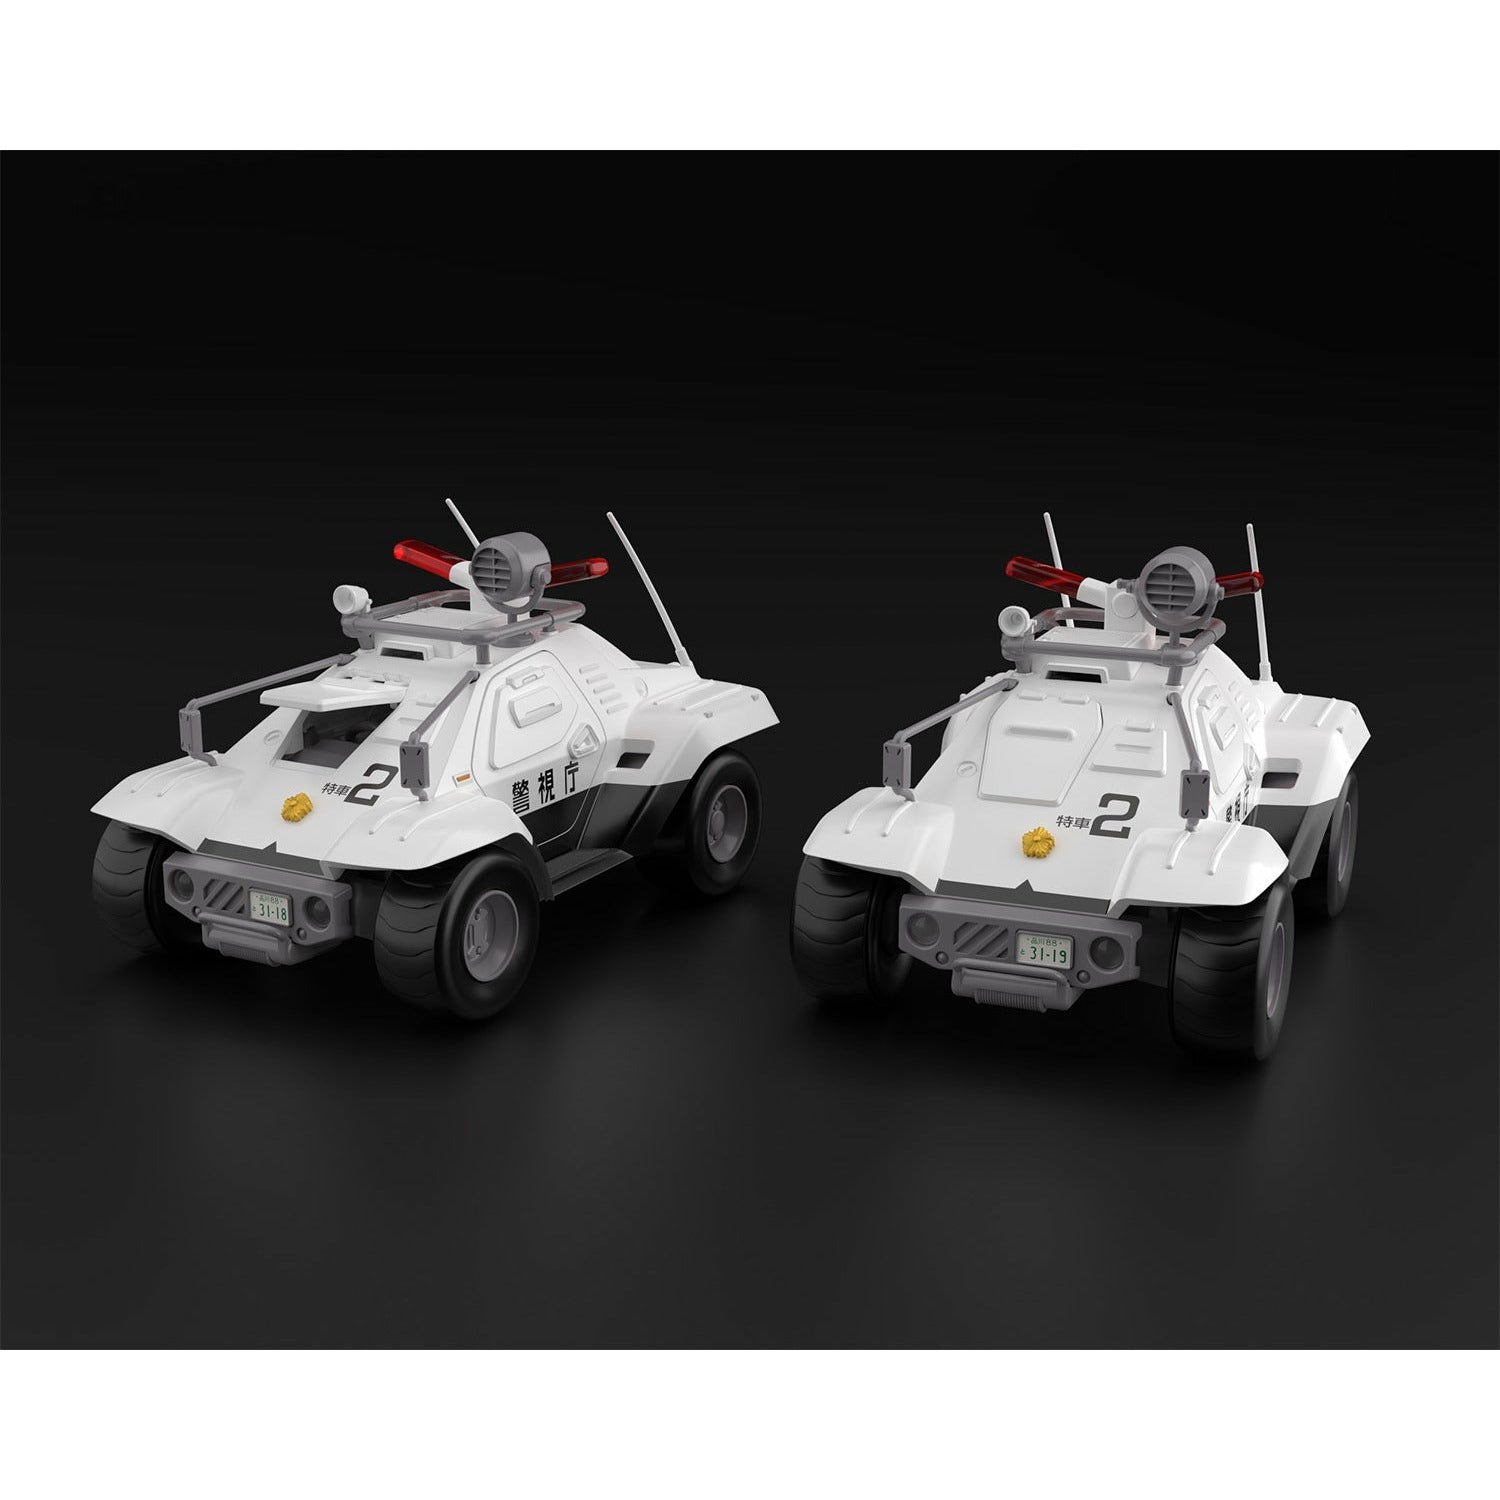 ACKS MP-02 Series Mobile Police Patlabor Type 98 Commnad Vehicle 2 Sets 1/43 #6306 by Aoshima